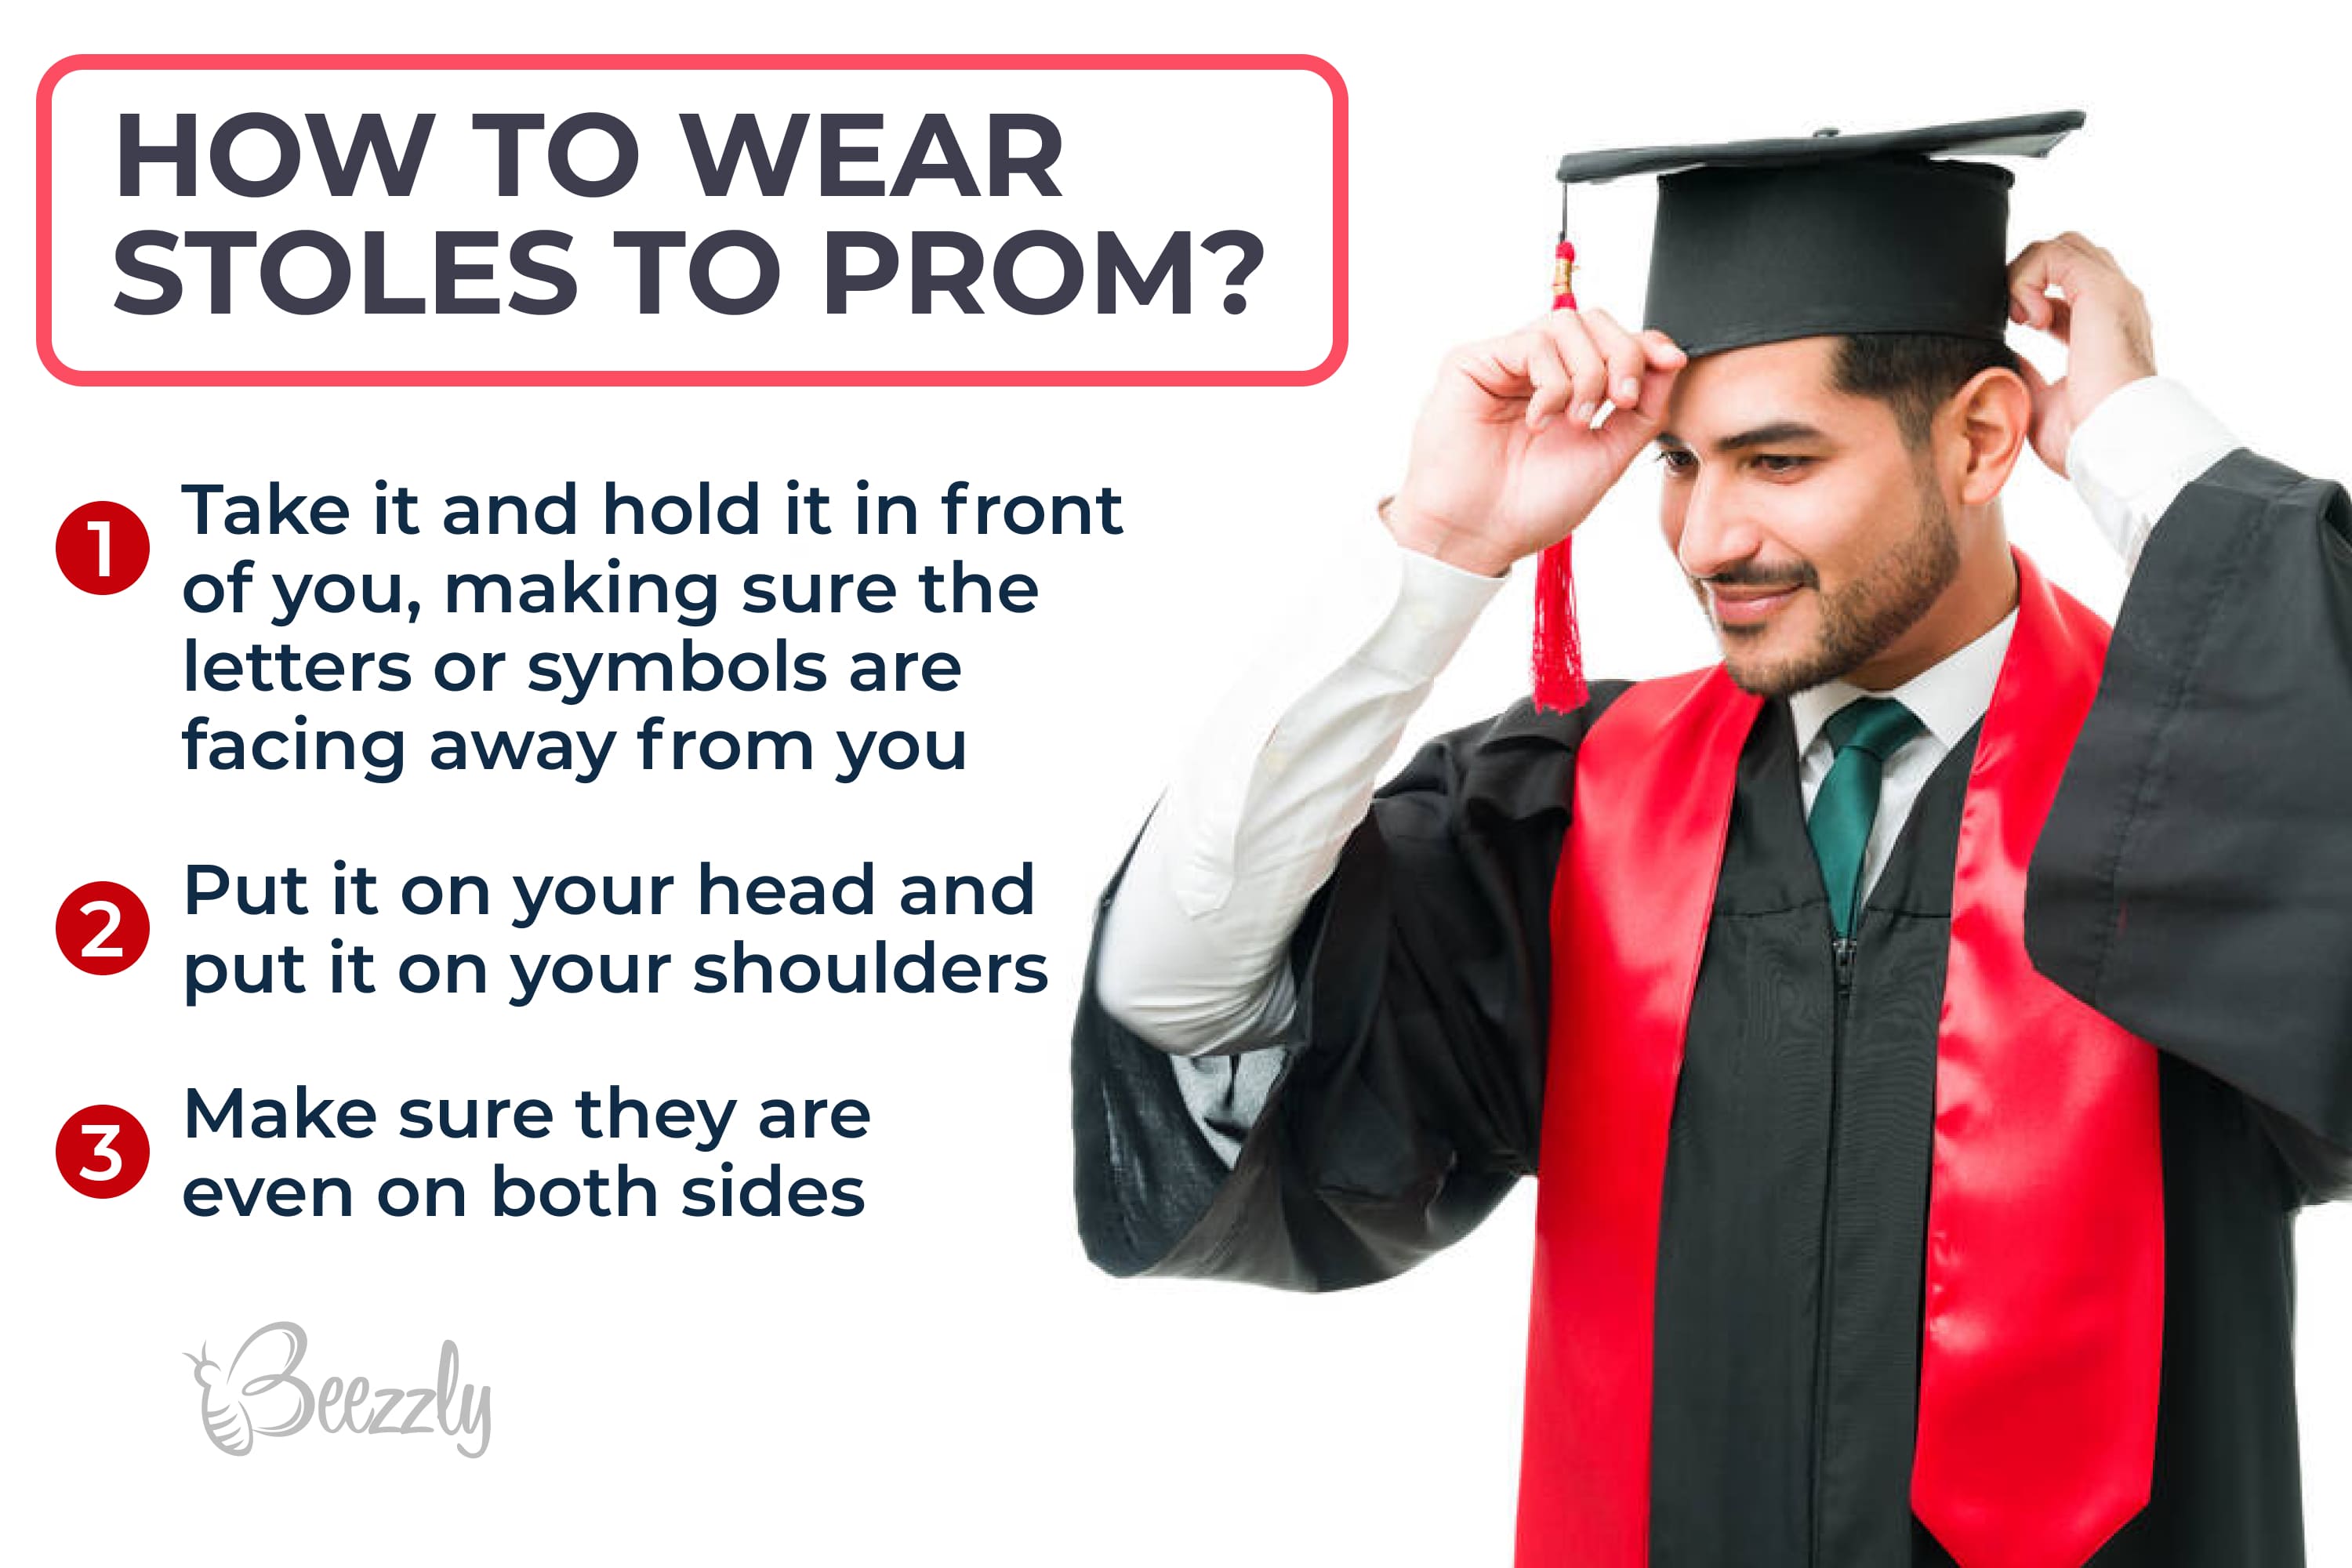 How to wear stoles to prom